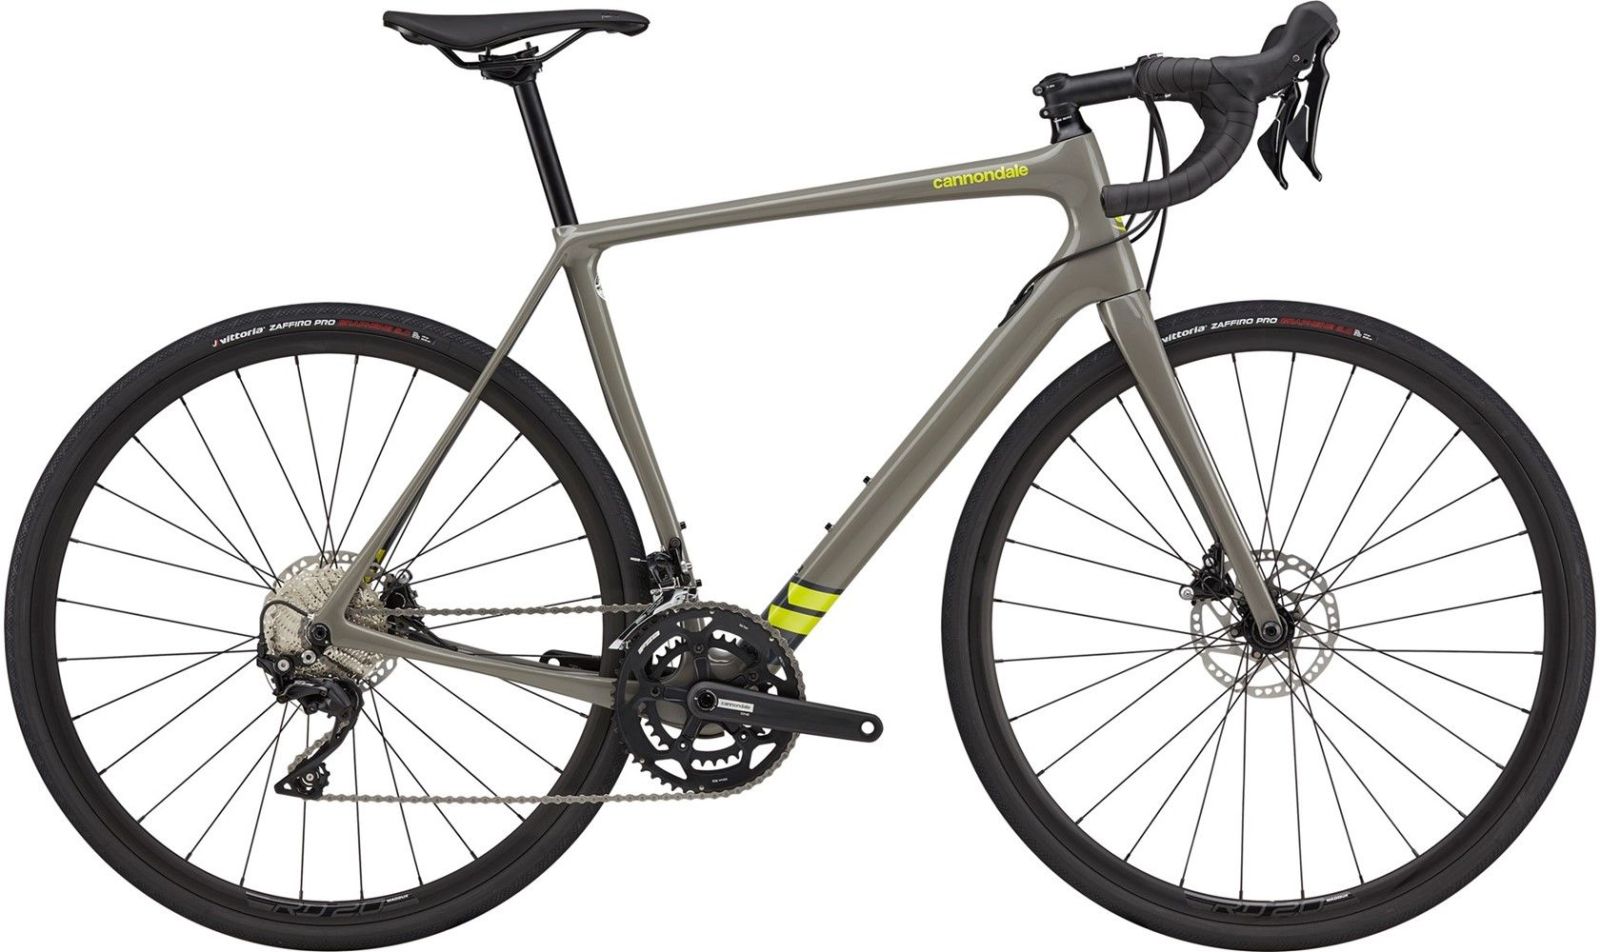 Cannondale Synapse Carbon 105 disc Road Bike 2021-Bicycles-Cannondale-XL-Chain Driven Cycles-Bike Shop-Ireland